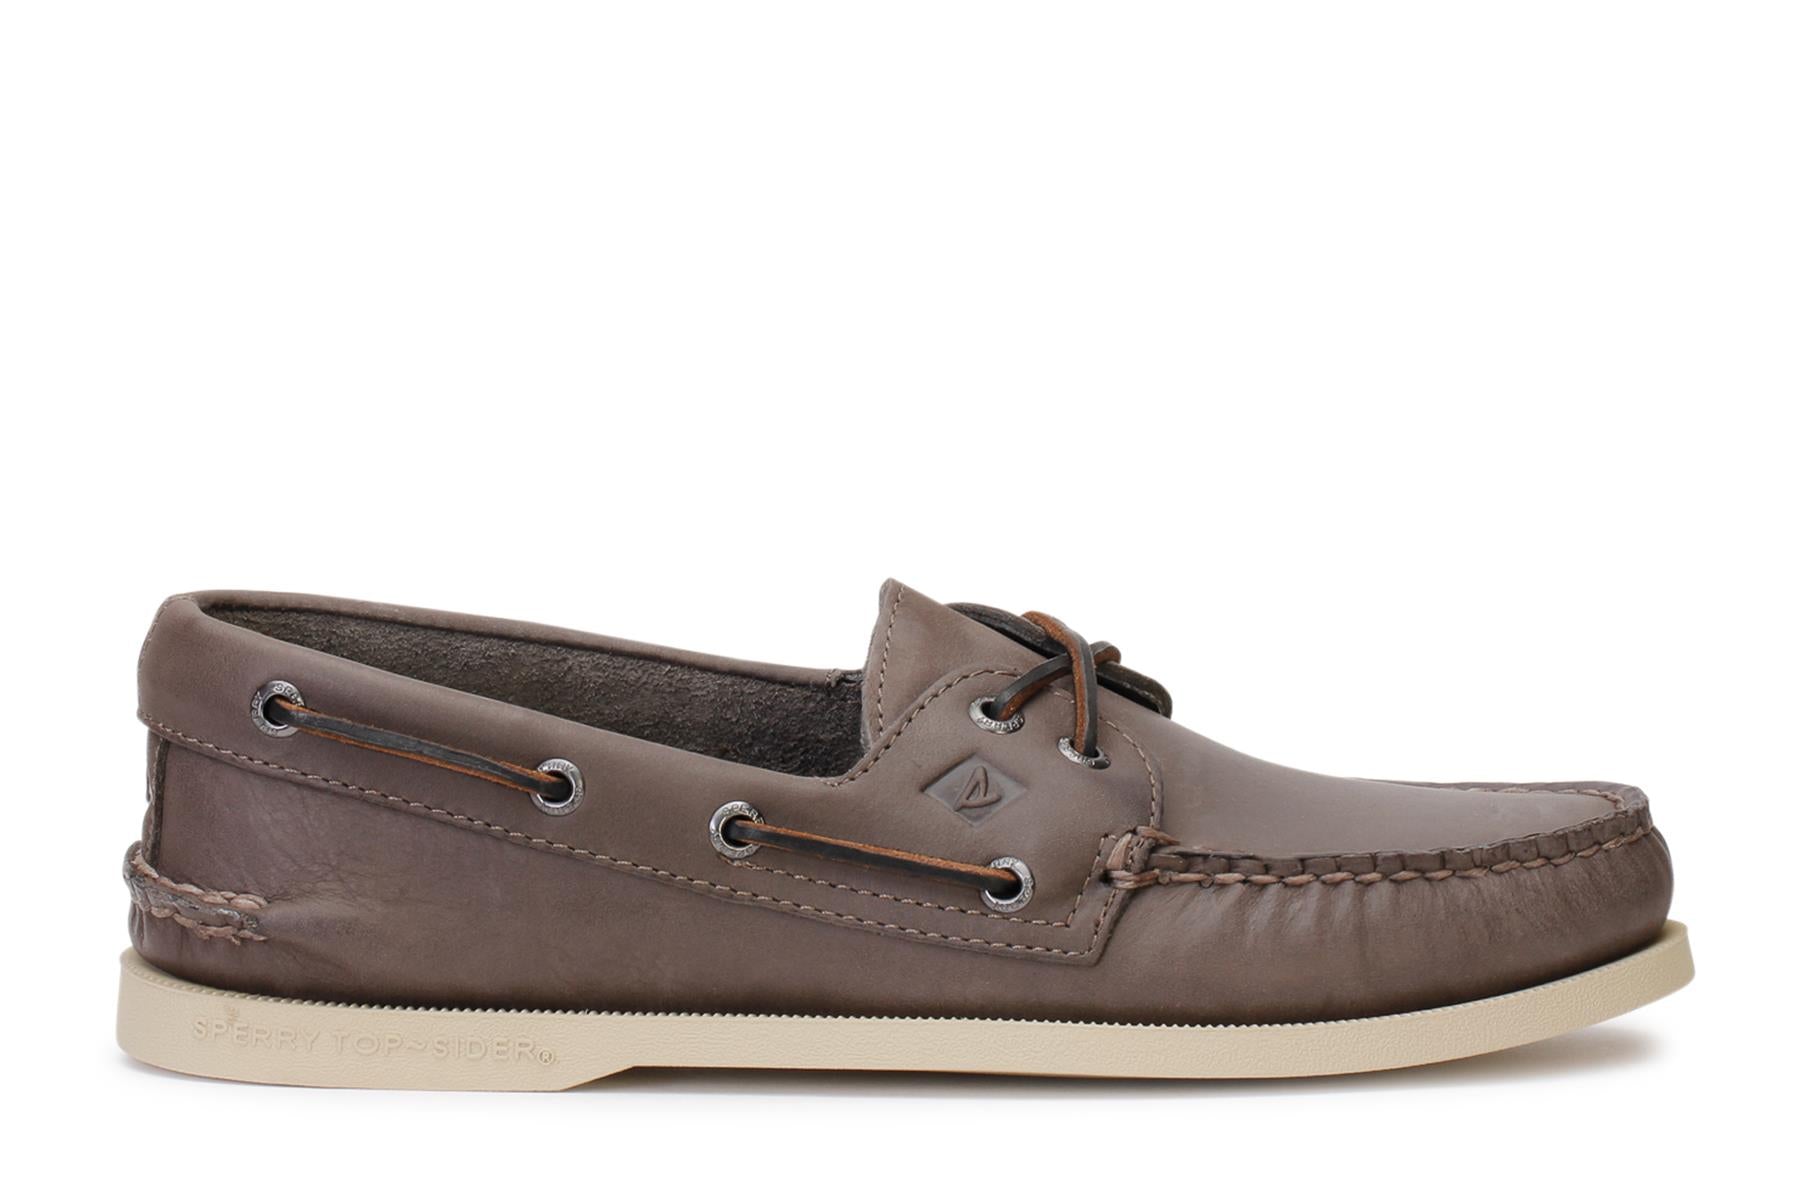 sperry-top-sider-mens-boat-shoes-a-o-2-eye-cross-lace-grey-sts16289-main